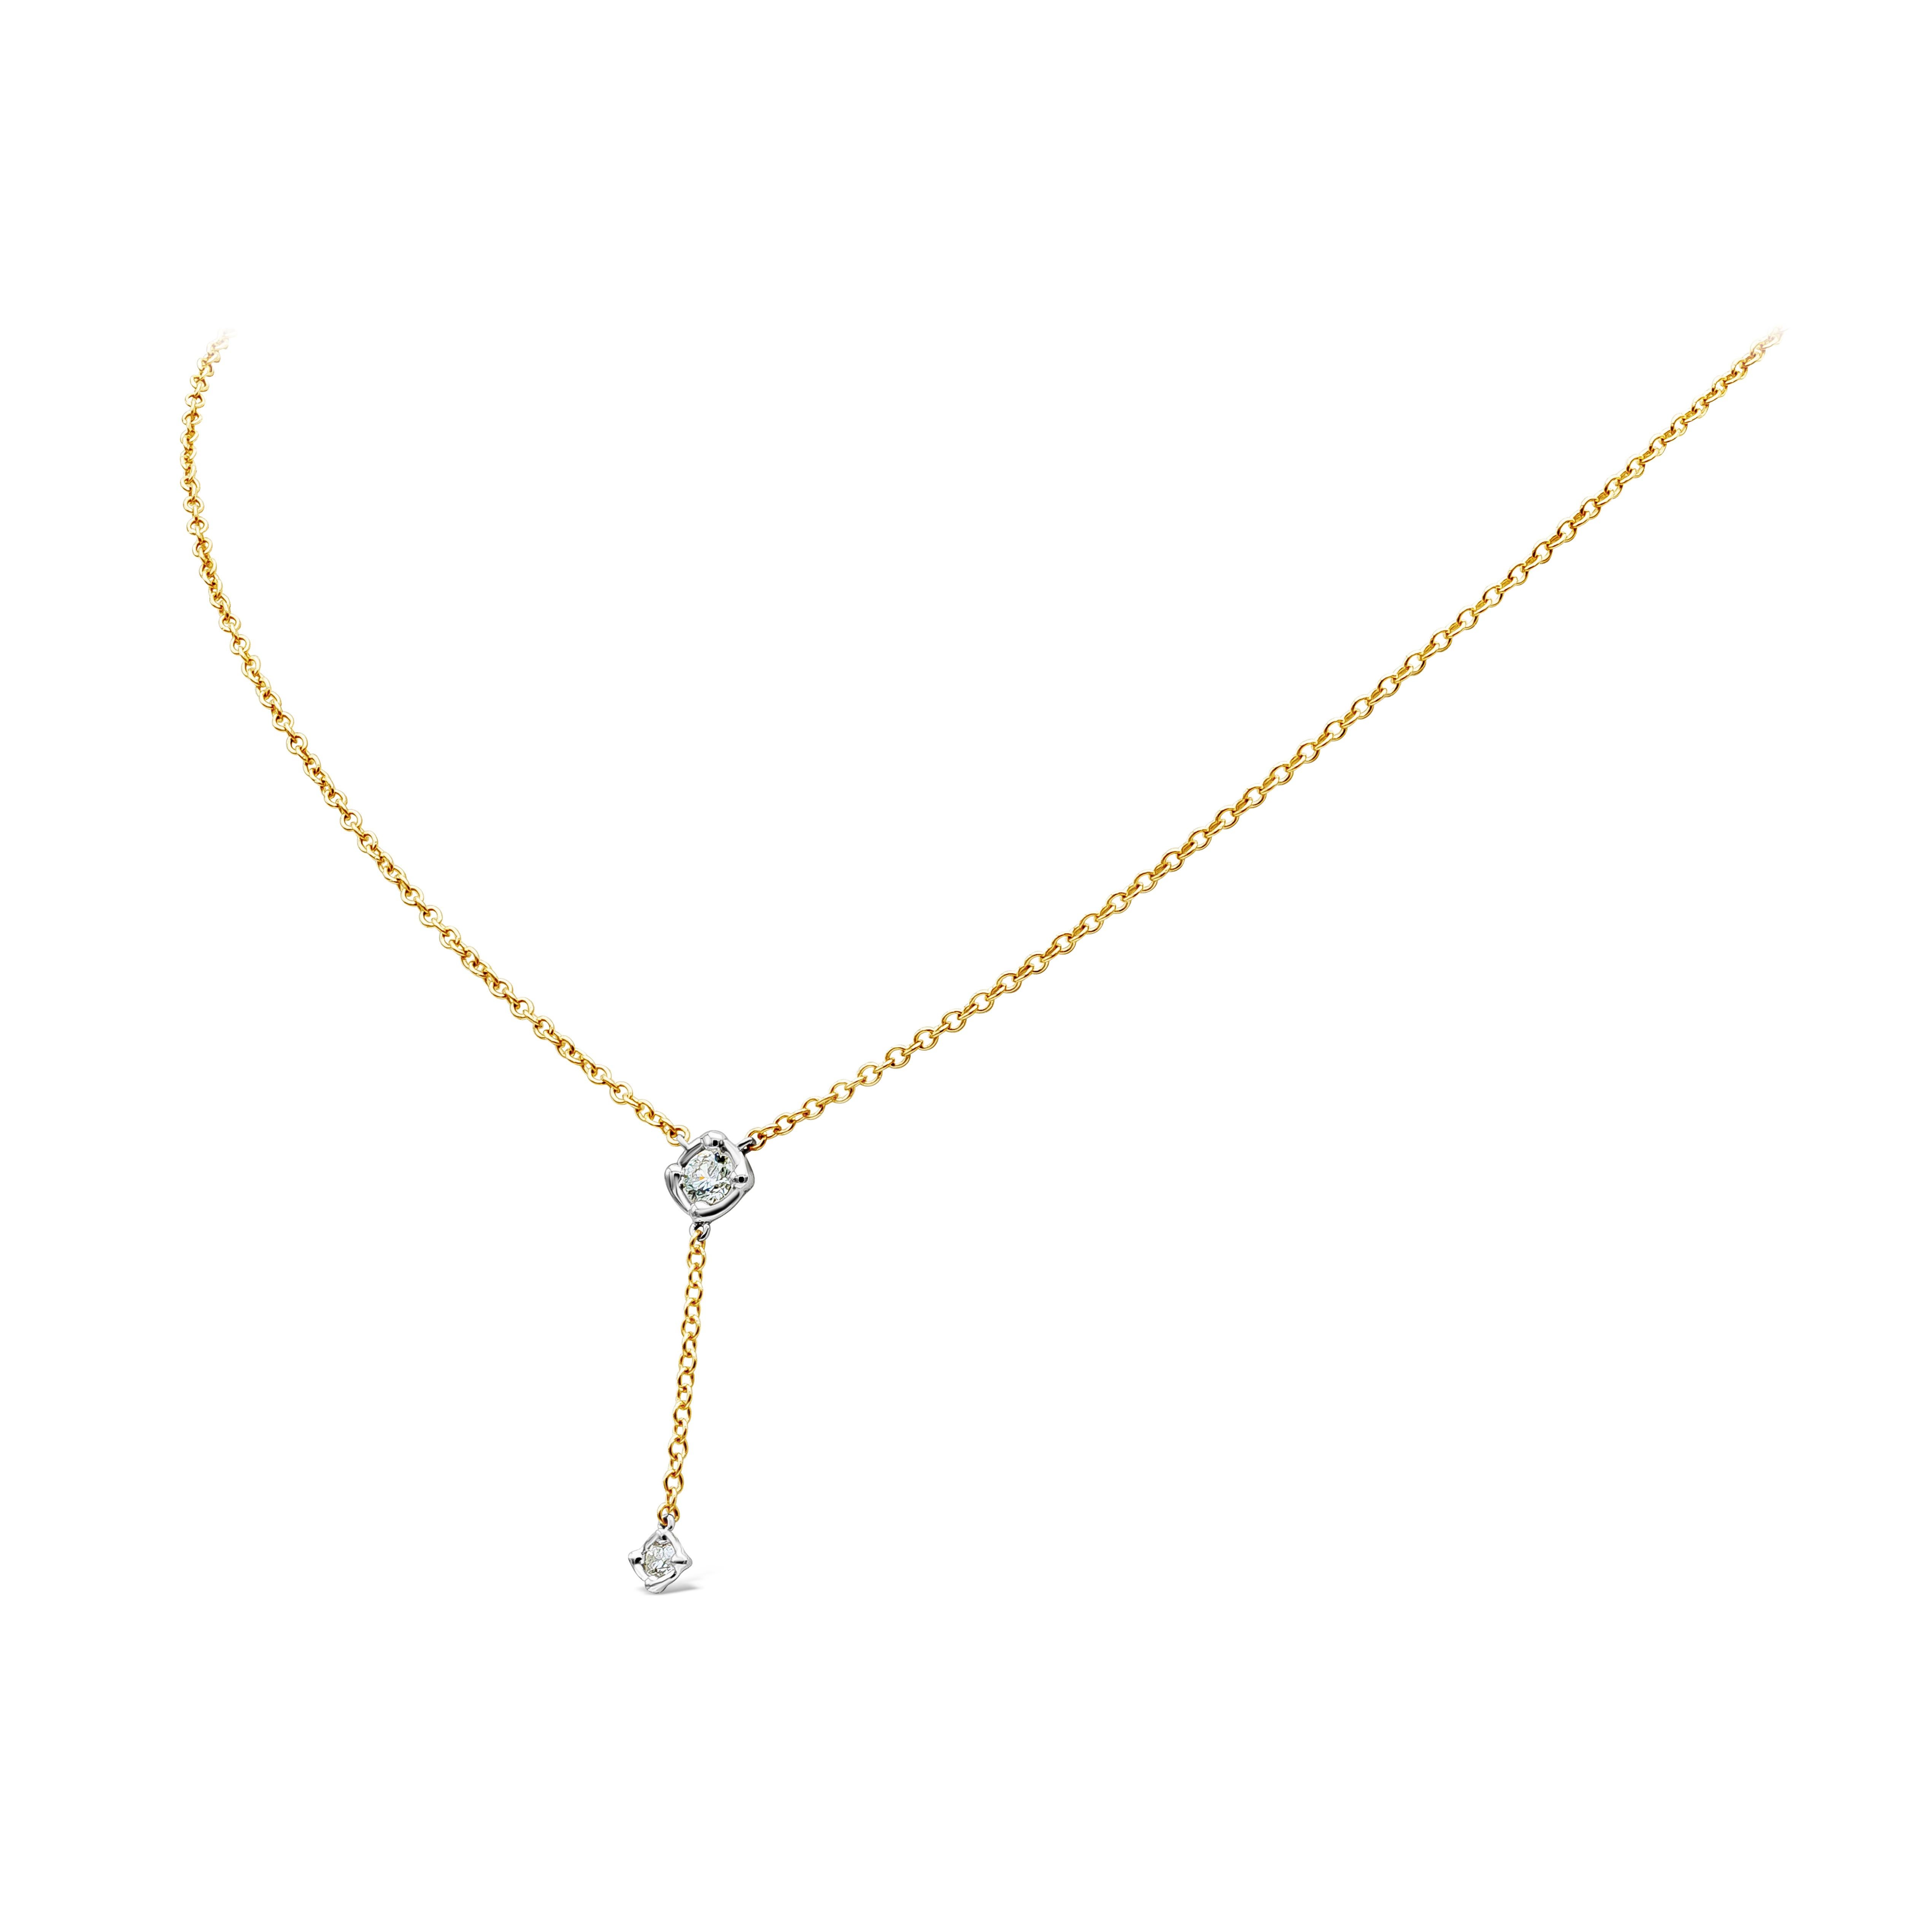 A simple pendant necklace showcasing 2 solitaire round diamond weighing 0.29 carat total. Small round diamond suspended on a slightly bigger diamond both set in white gold bezel. Made with 18K Yellow Gold Chain. 16 inches in Length. 

Style